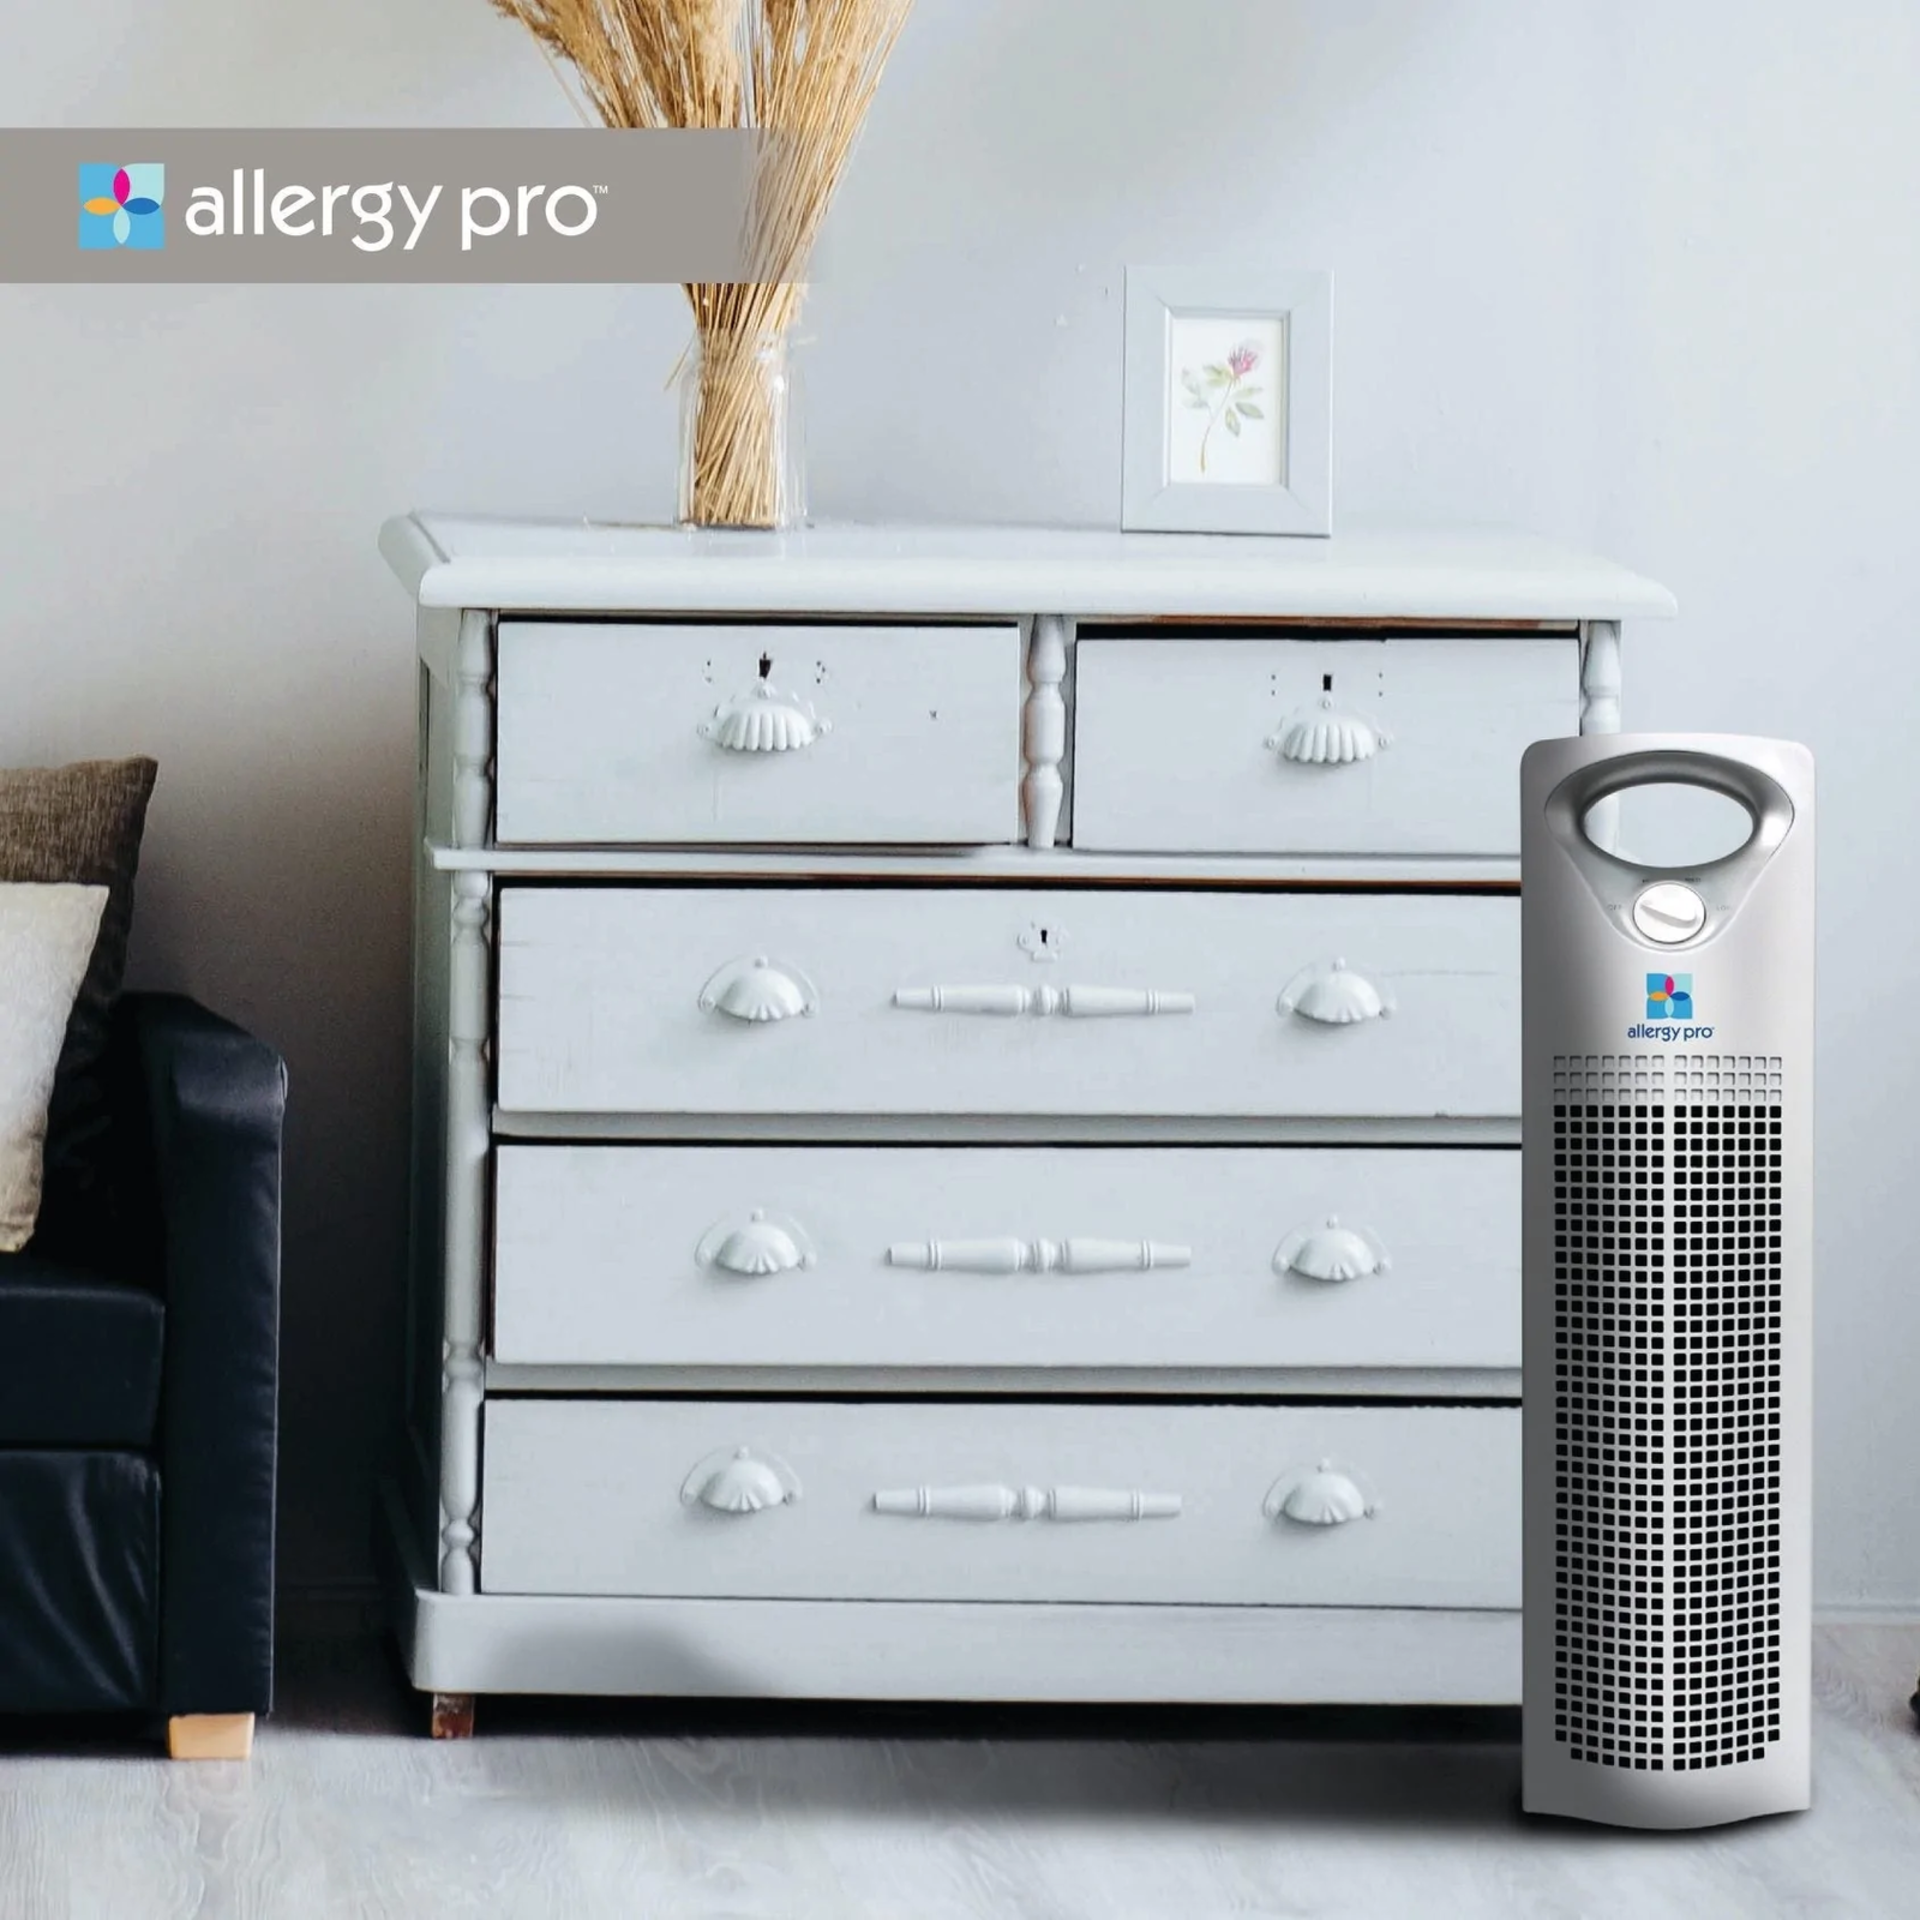 Pallet To Include 8 x Brand NewBoneco Envion AP200 Allergy Pro™ Air Purifier RRP £199, Introducing - Image 2 of 2